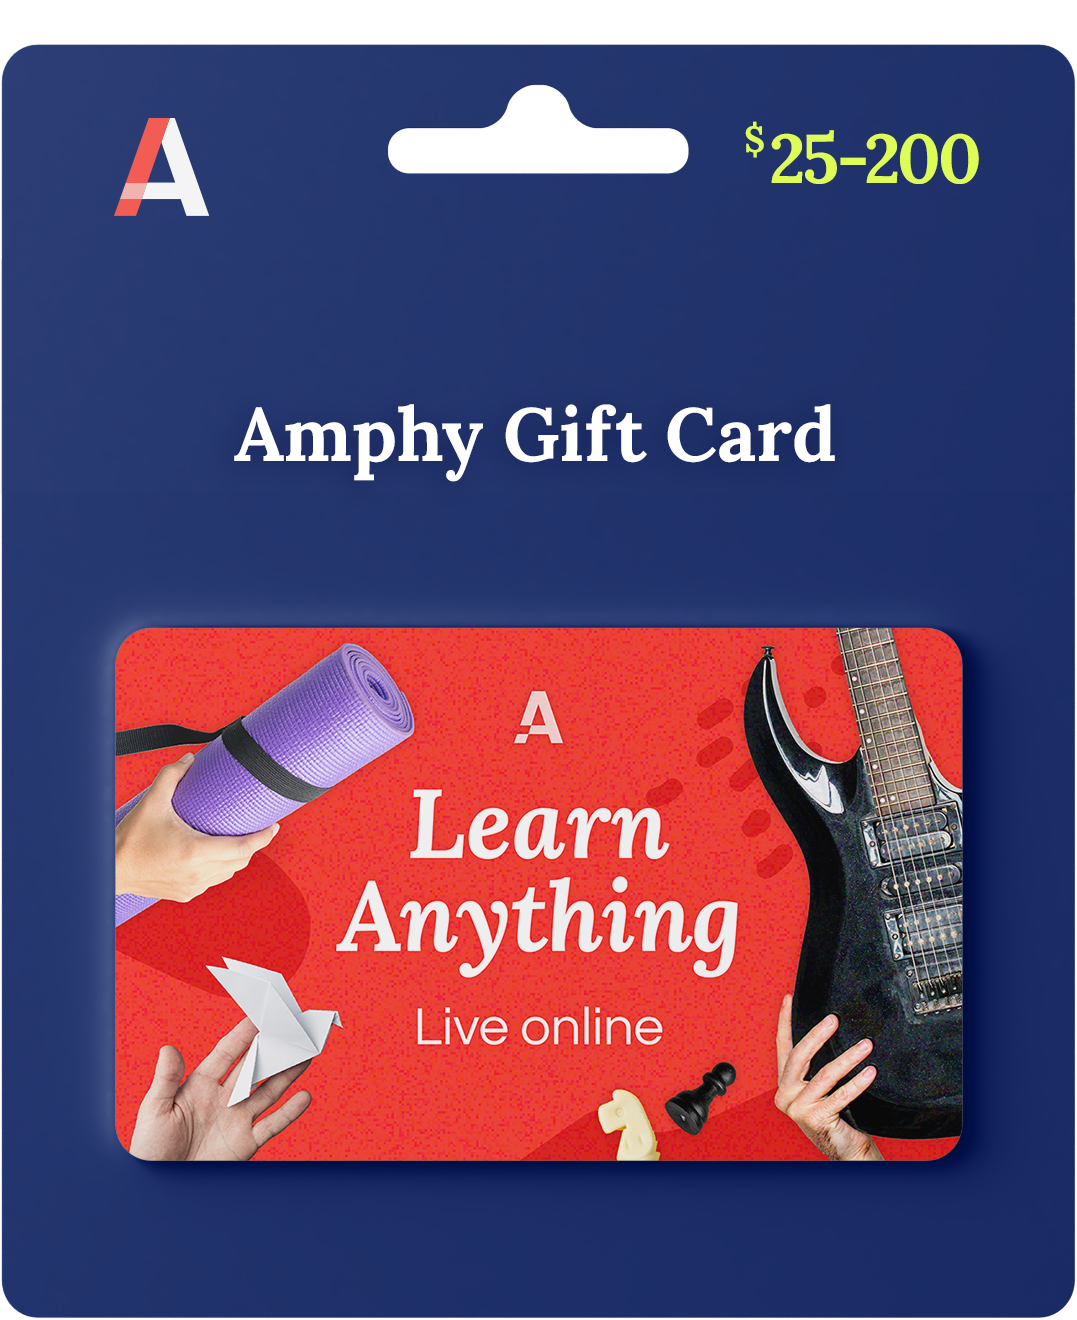 Amphy gift card (Adcore studio)